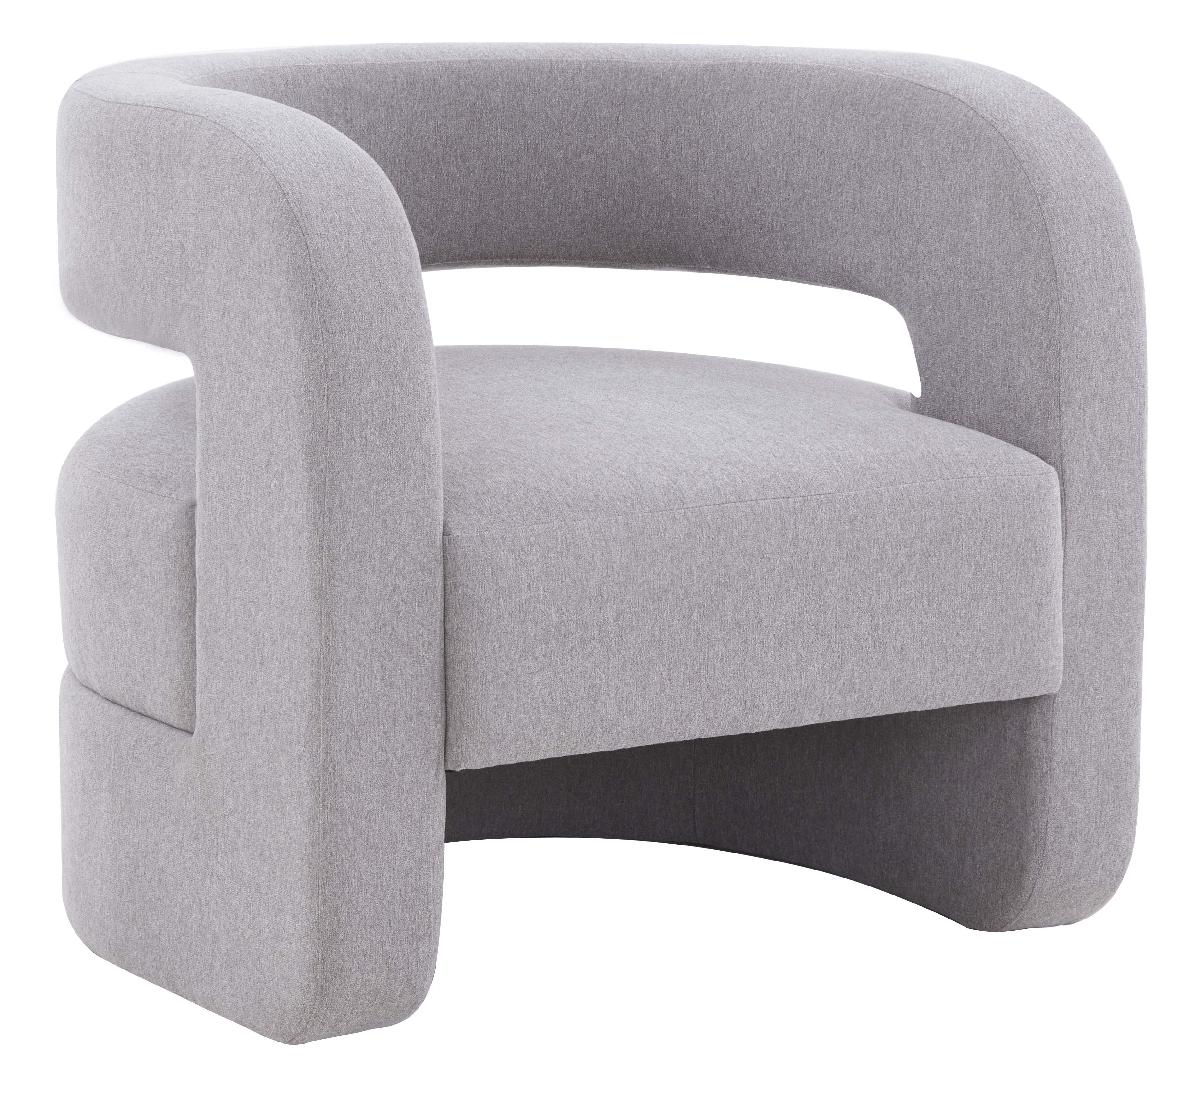 Safavieh Couture Anissa Barrel Back Accent Chair - Light Grey